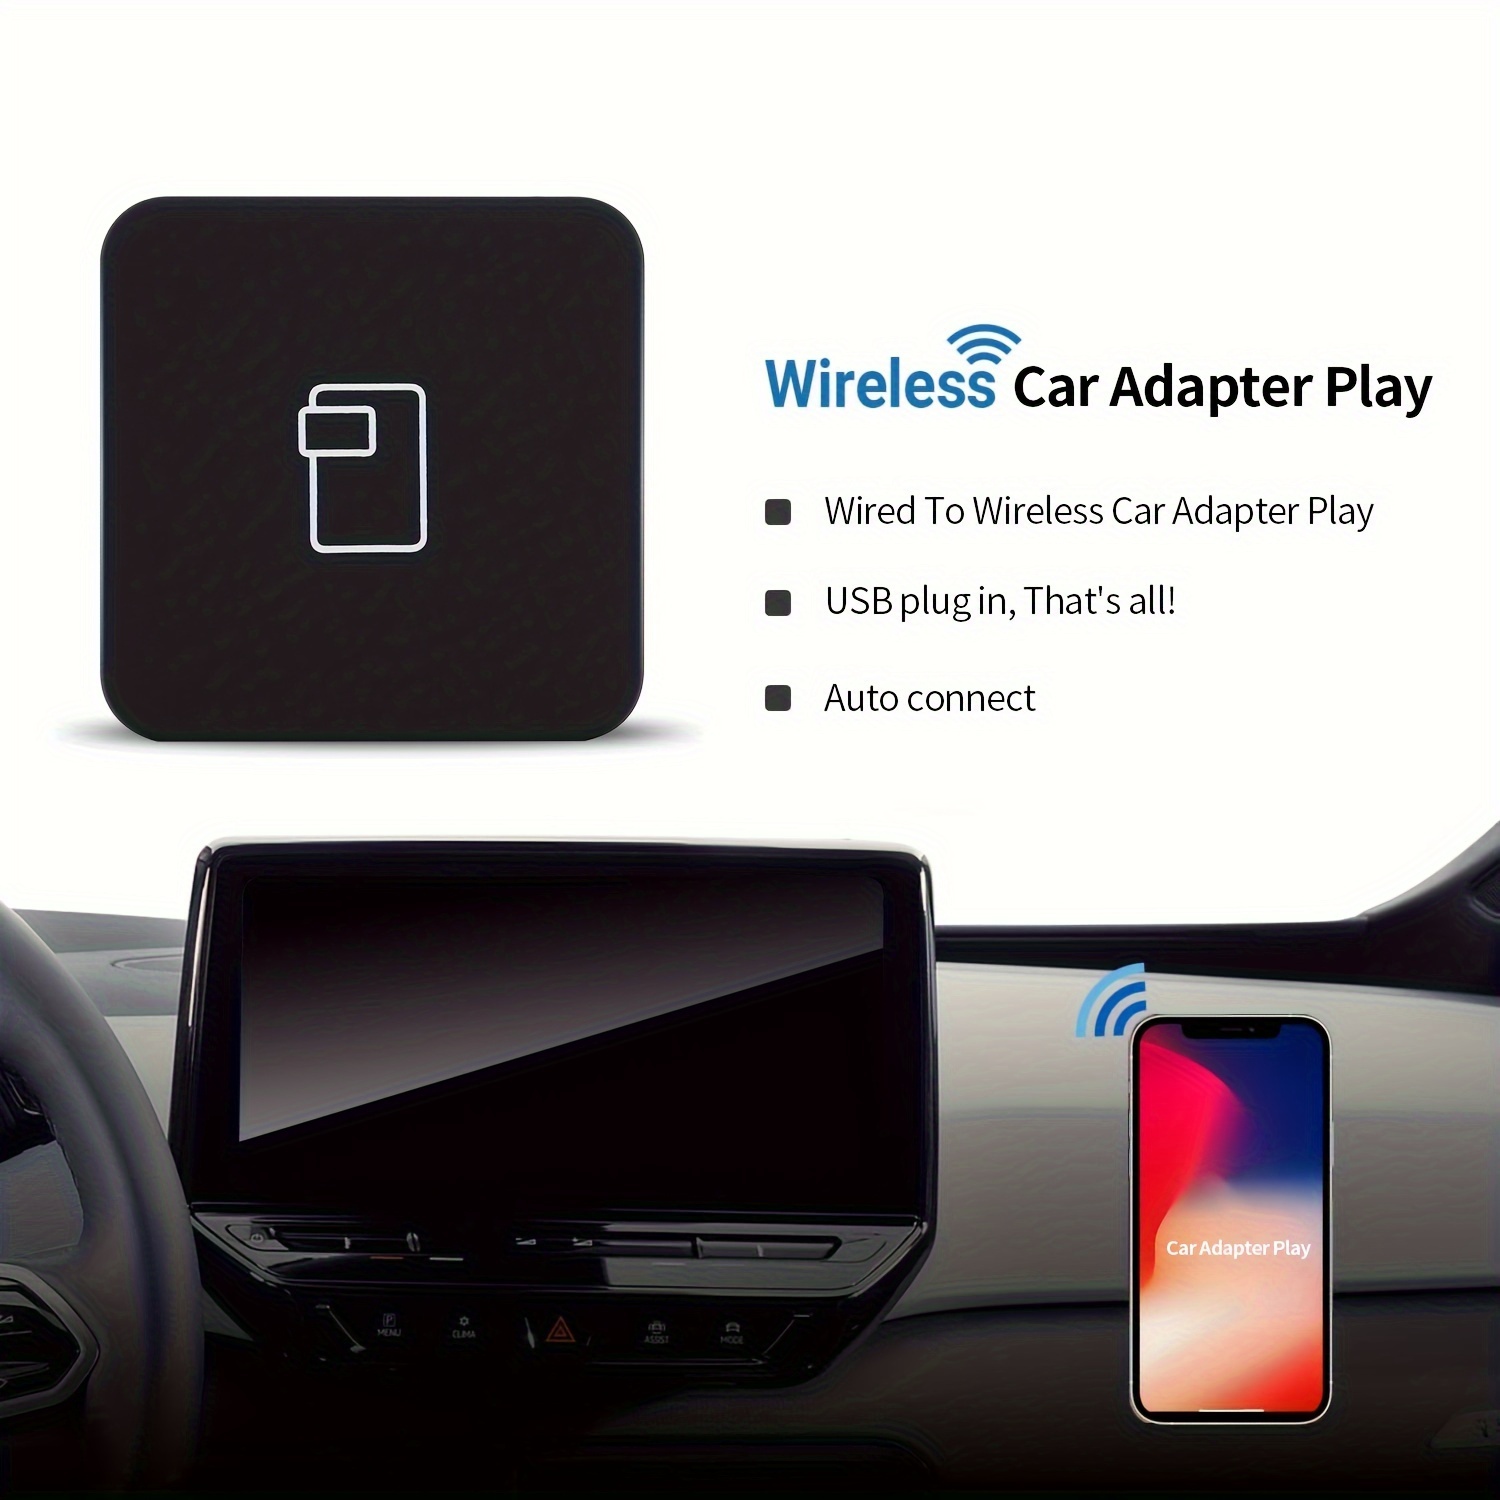 Ai Box Wired To Wireless For Carplay For Android Auto - Temu